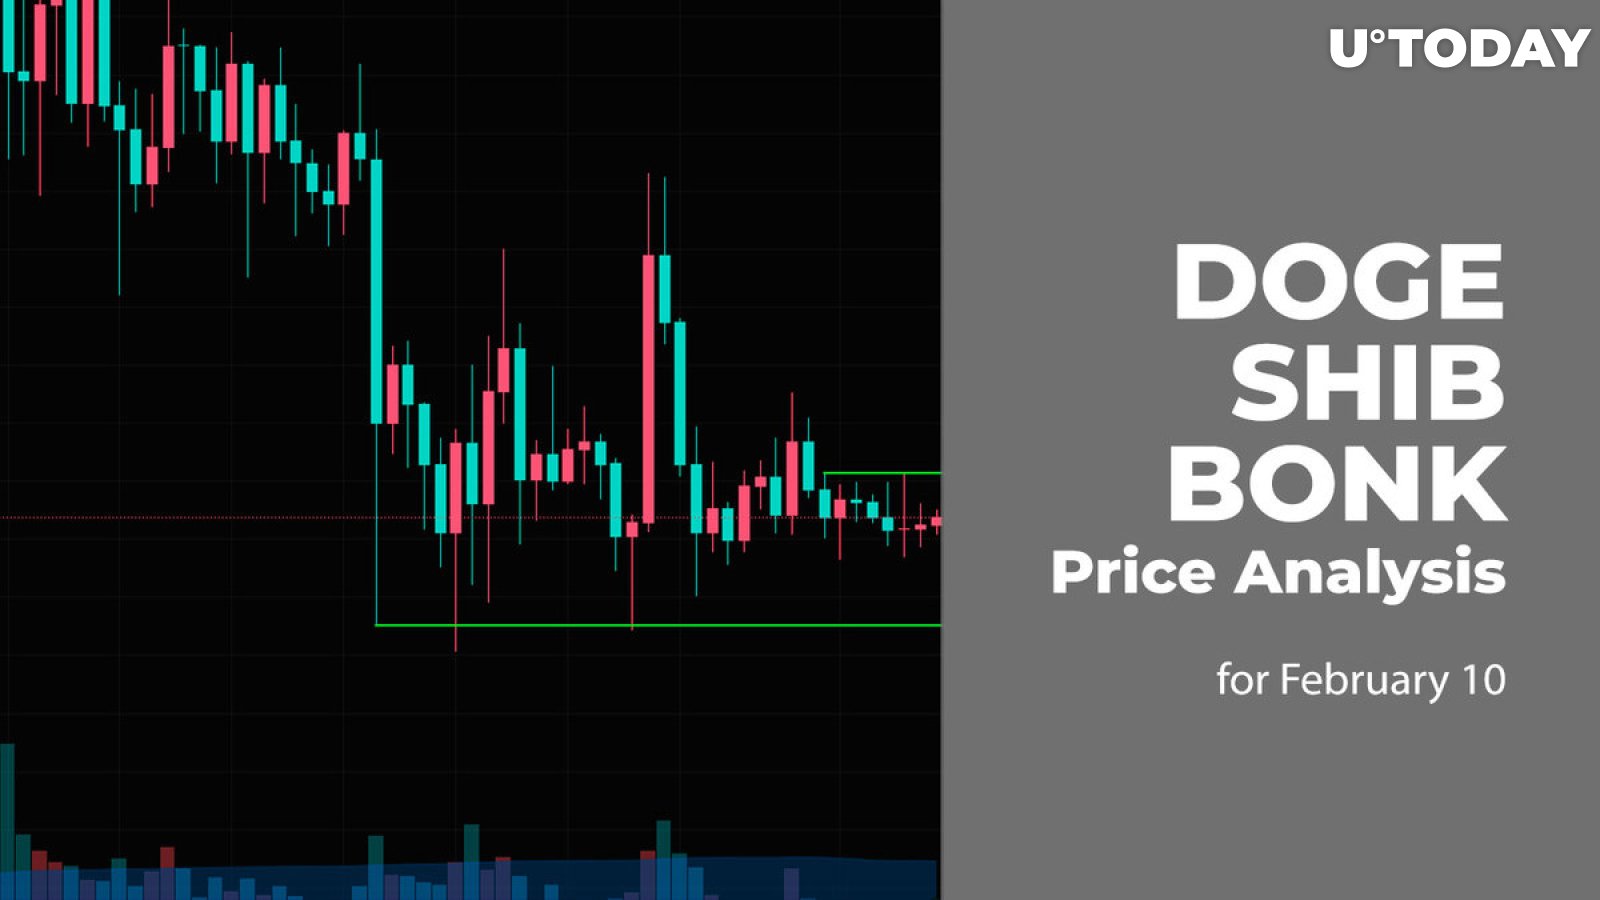 DOGE, SHIB and BONK Price Prediction for February 10